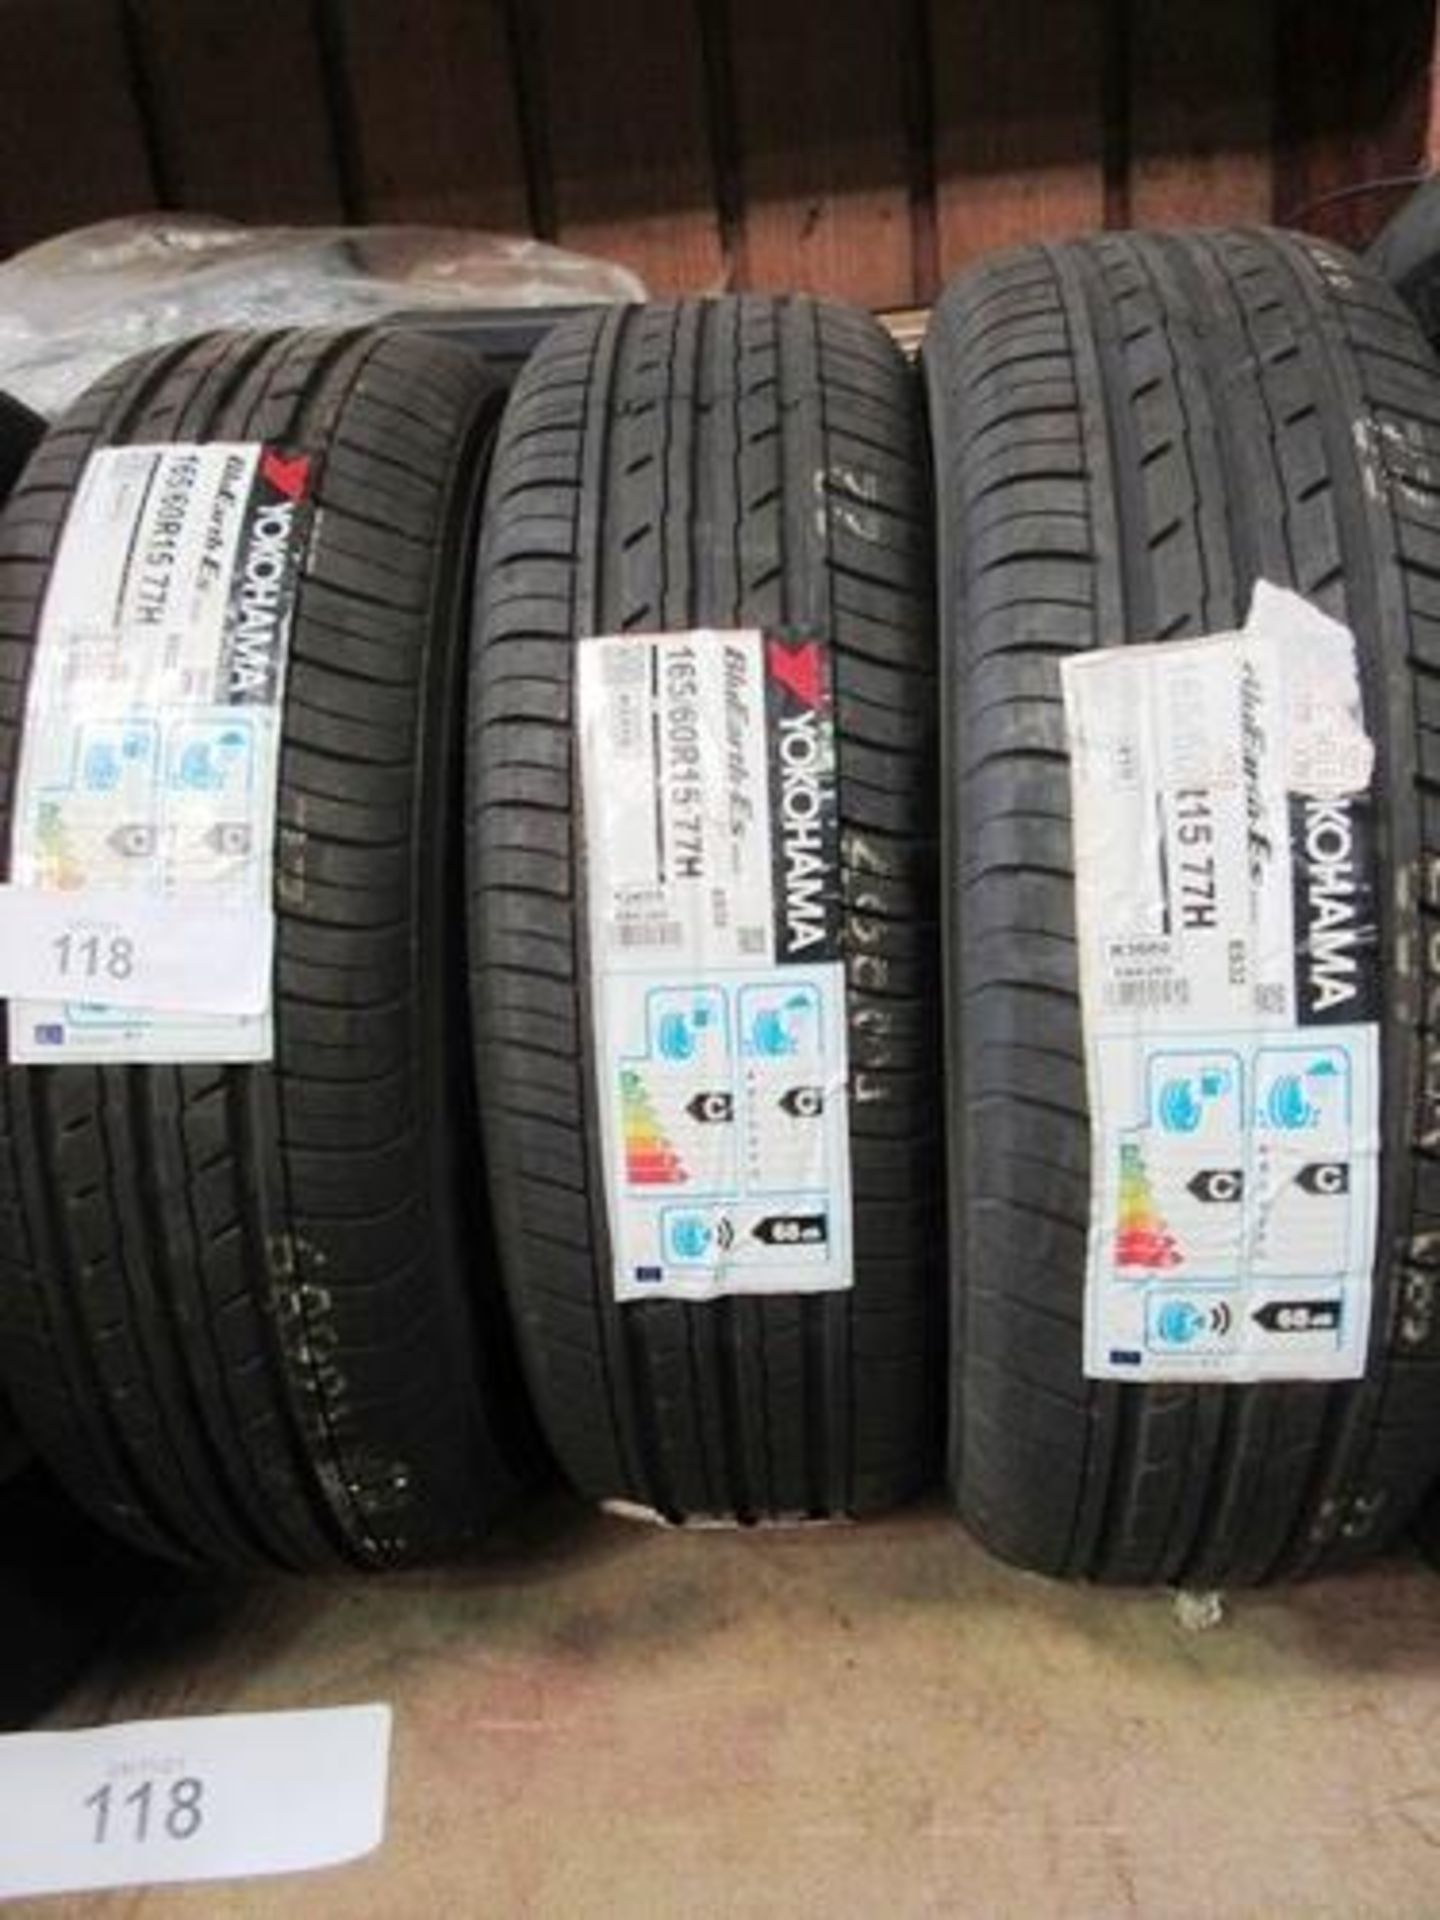 3 x Yokohama BluEarth ES32 tyres, size 165/60R15 77H - New with labels (GS7)